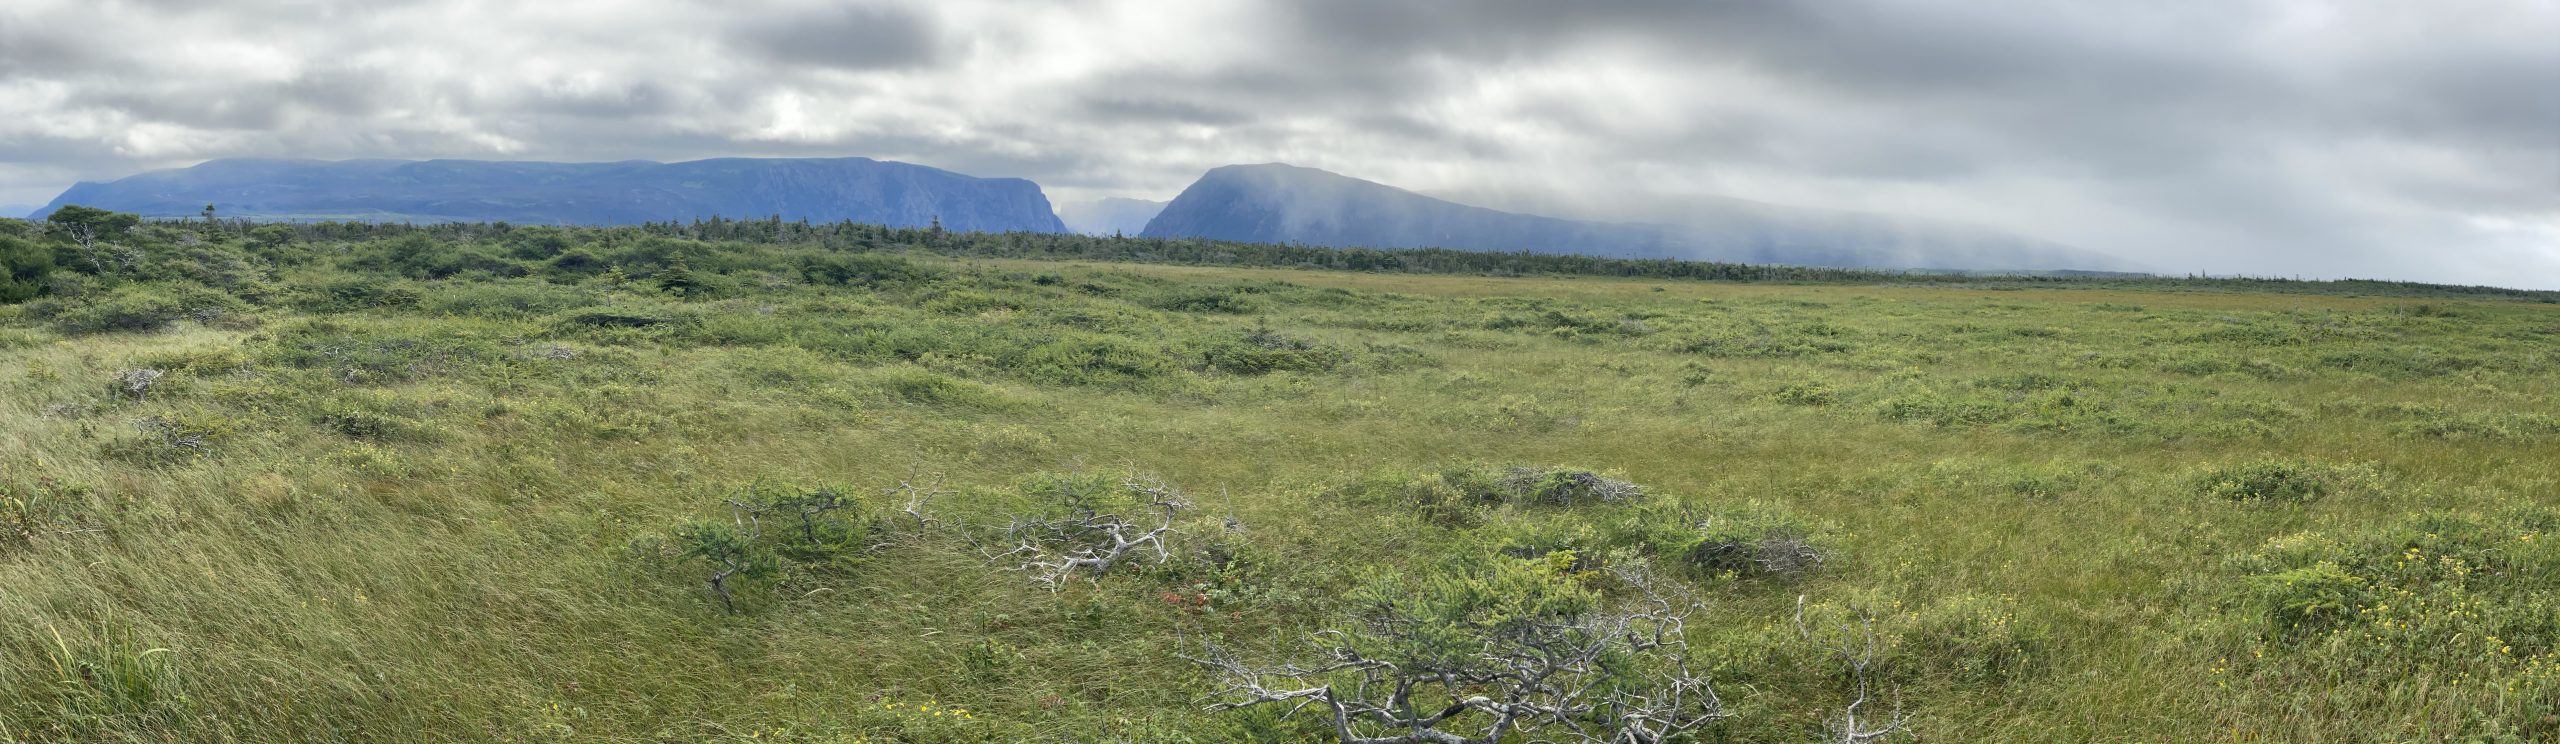 A panoramic view of the Long Range mountains, near Gros Morne National Park in Newfoundland.